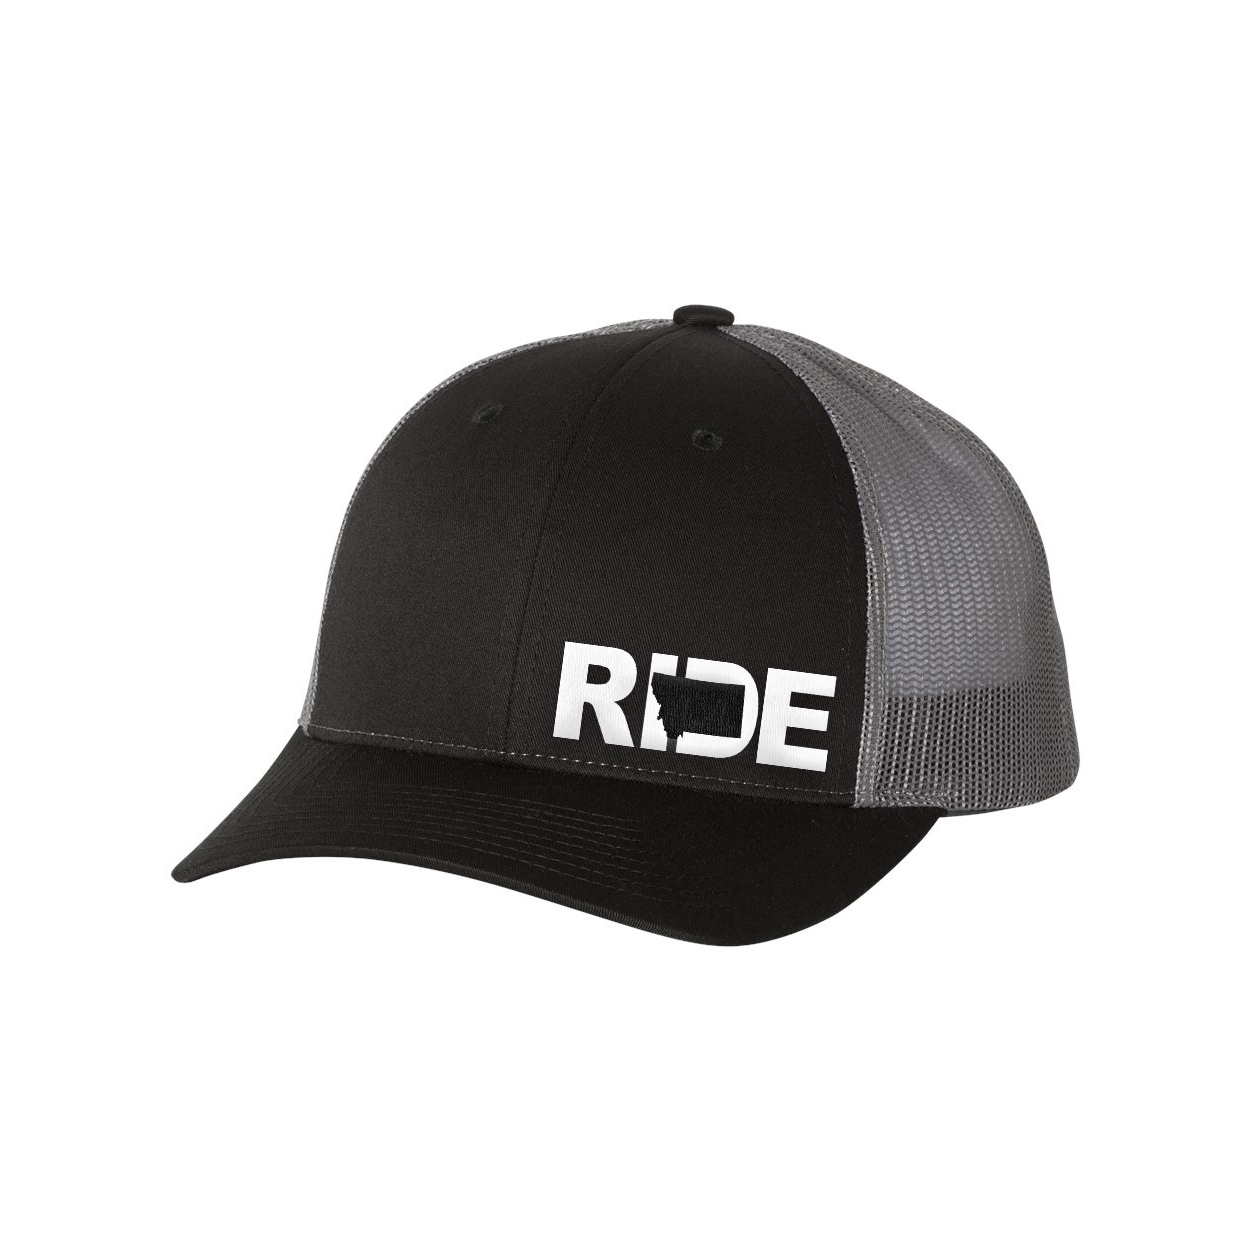 Ride Montana Night Out Pro Embroidered Snapback Trucker Hat Black/Gray